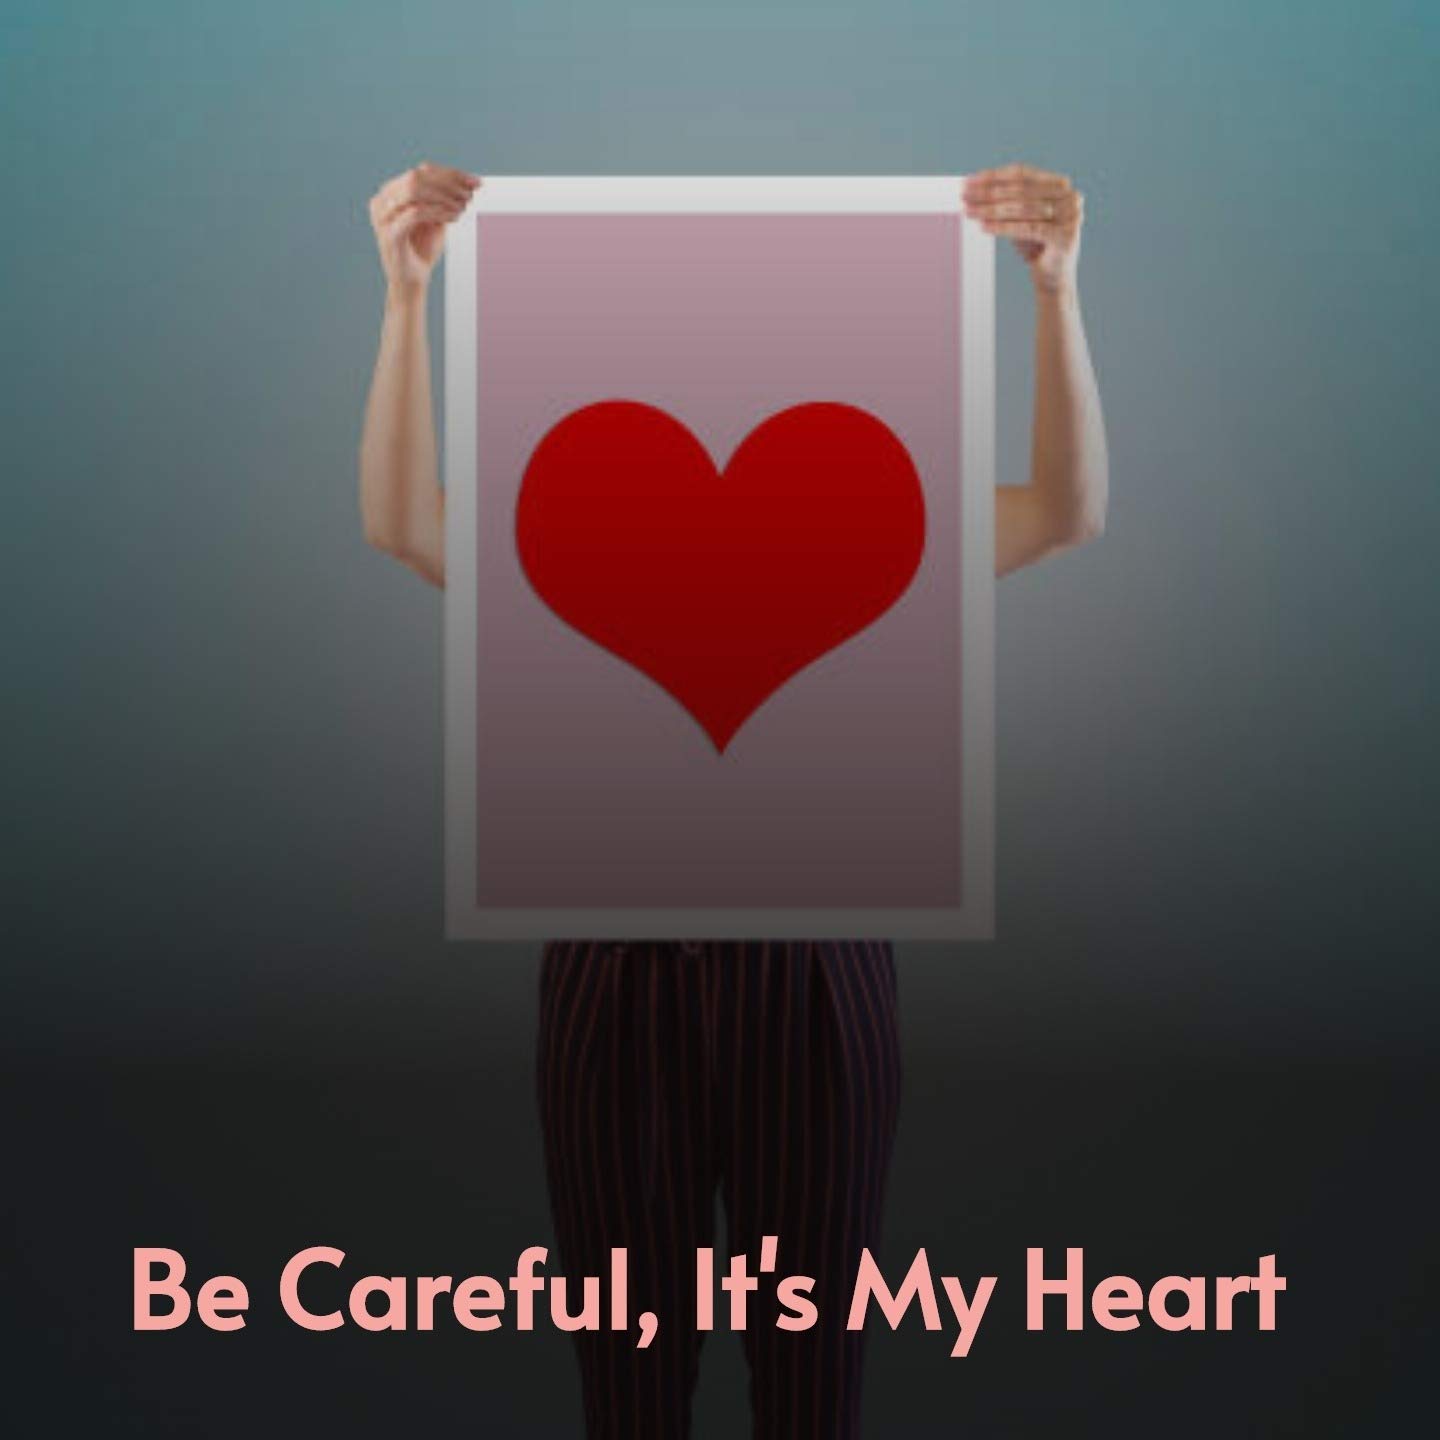 Song lyrics to Be Careful, It's My Heart (1942), Music and Lyrics by Irving Berlin. Sung by Bing Crosby at the Holiday Inn on Valentine's Day